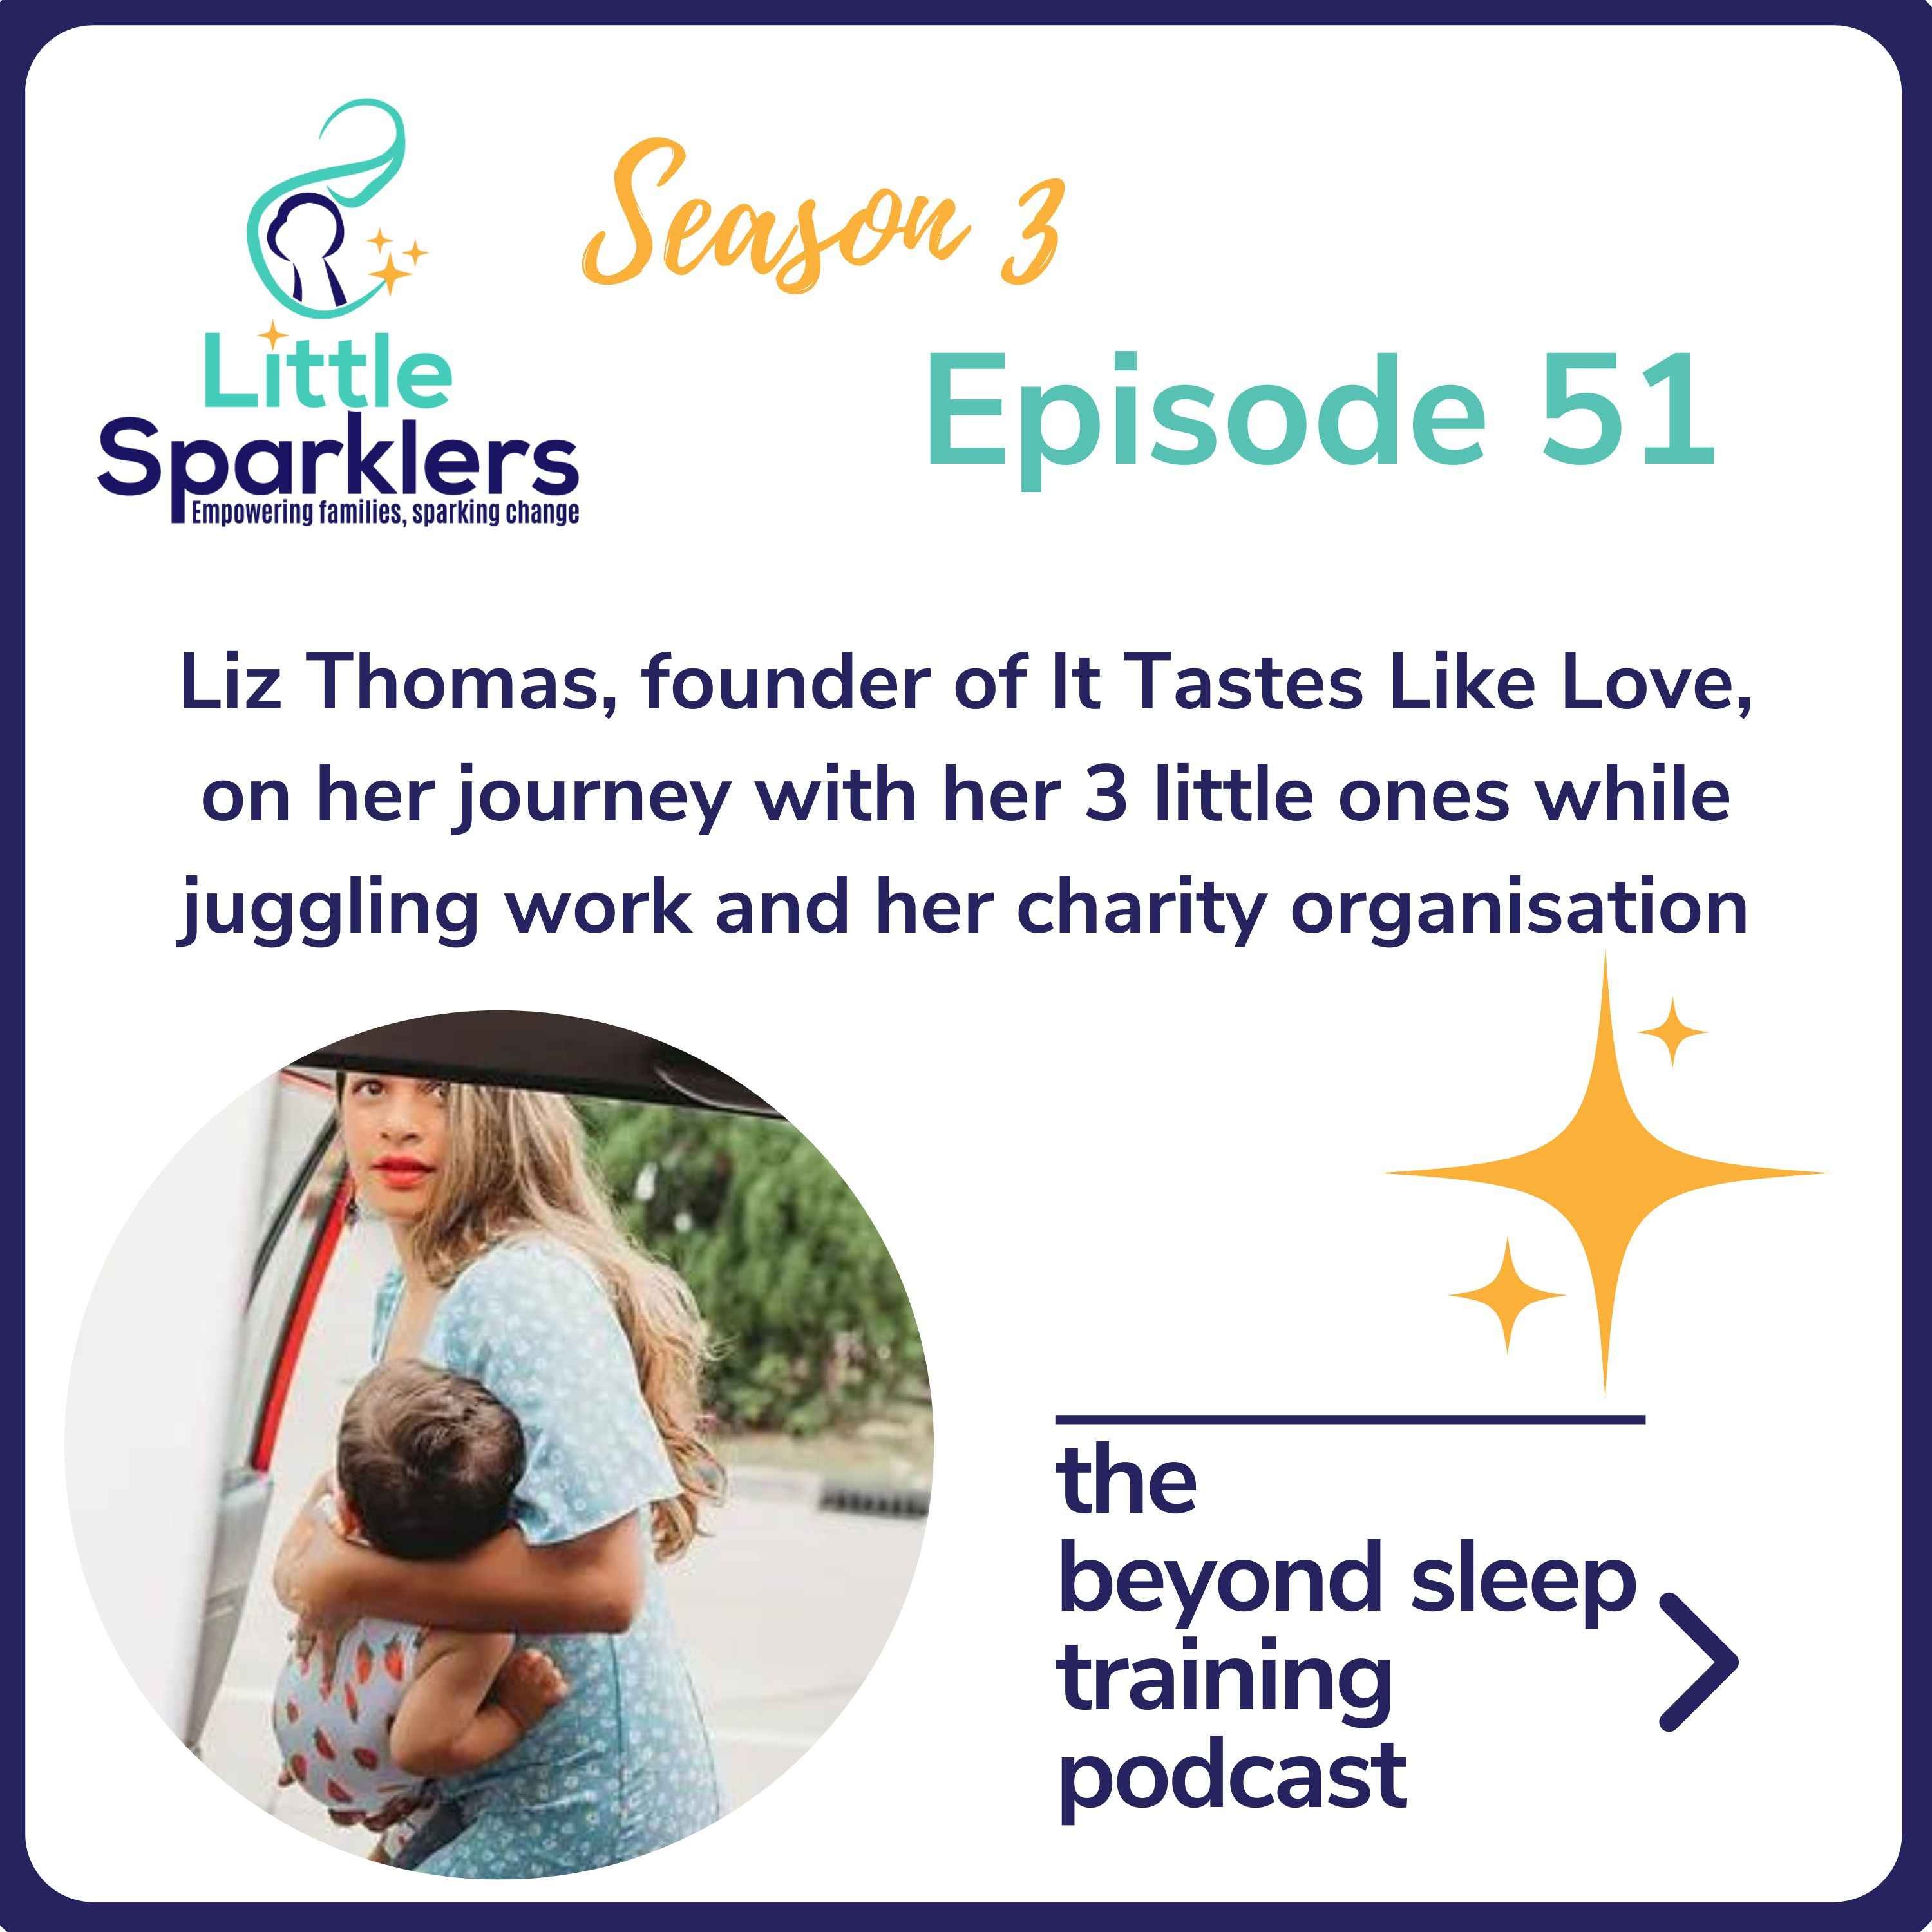 Liz Thomas, founder of It Tastes Like Love, on her journey with her 3 little ones while juggling work and her charity organisation